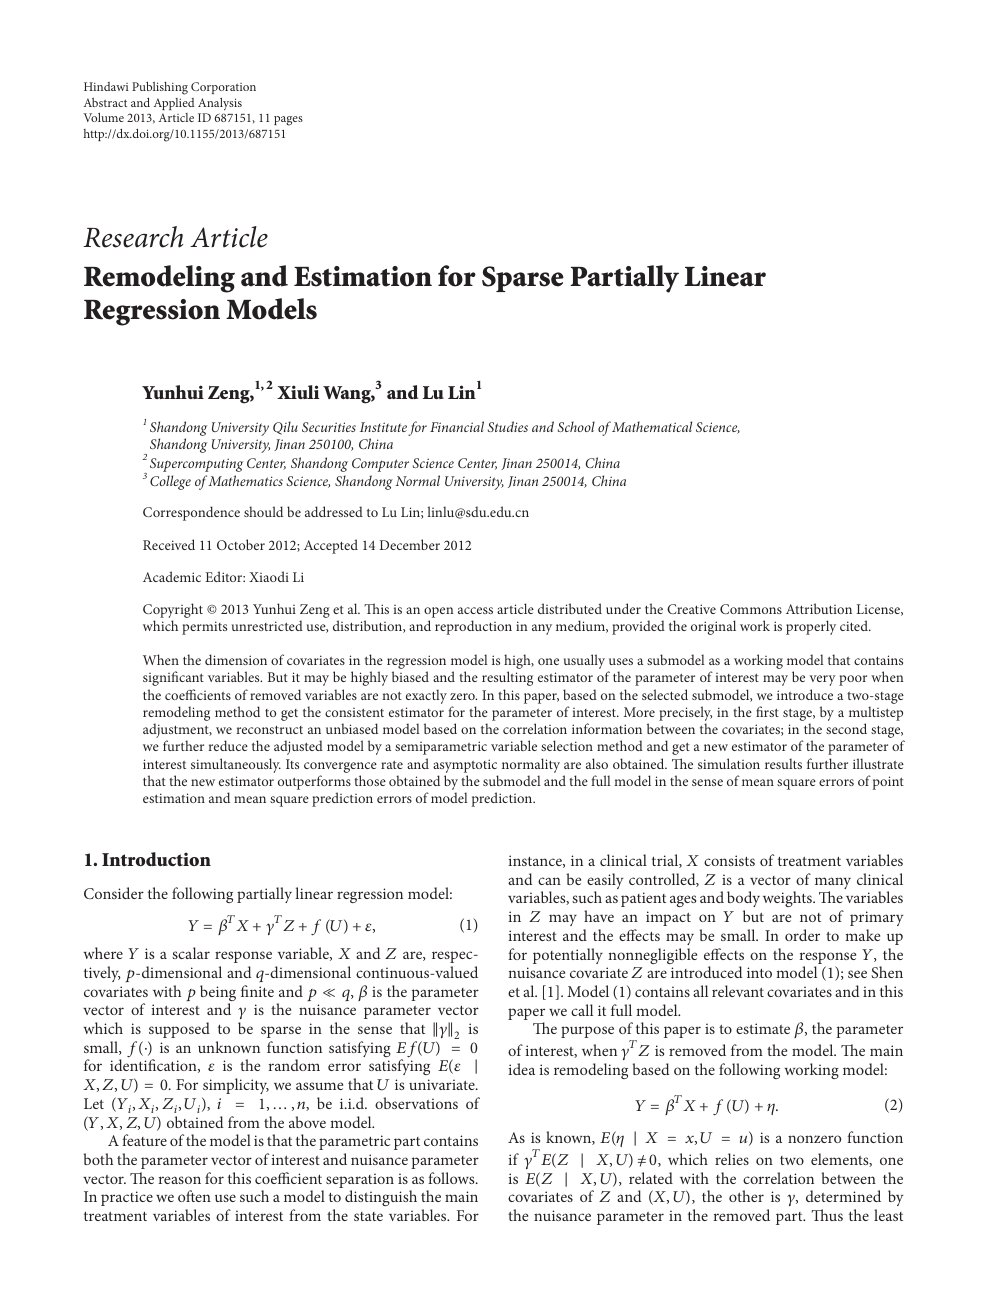 Remodeling And Estimation For Sparse Partially Linear Regression Models Topic Of Research Paper In Mathematics Download Scholarly Article Pdf And Read For Free On Cyberleninka Open Science Hub